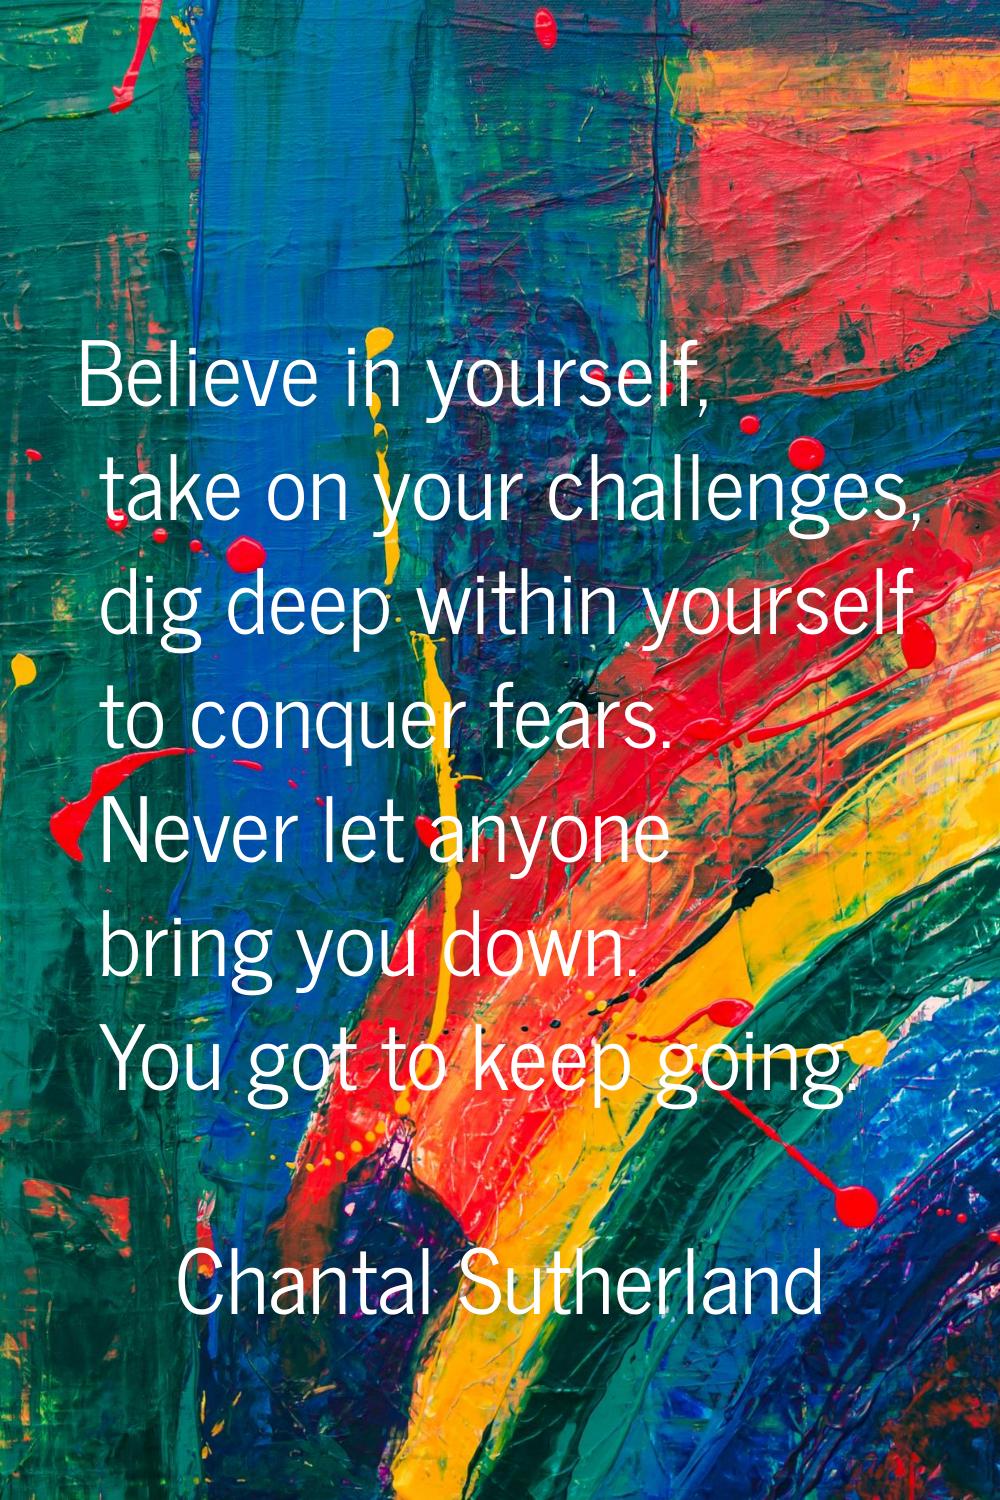 Believe in yourself, take on your challenges, dig deep within yourself to conquer fears. Never let 